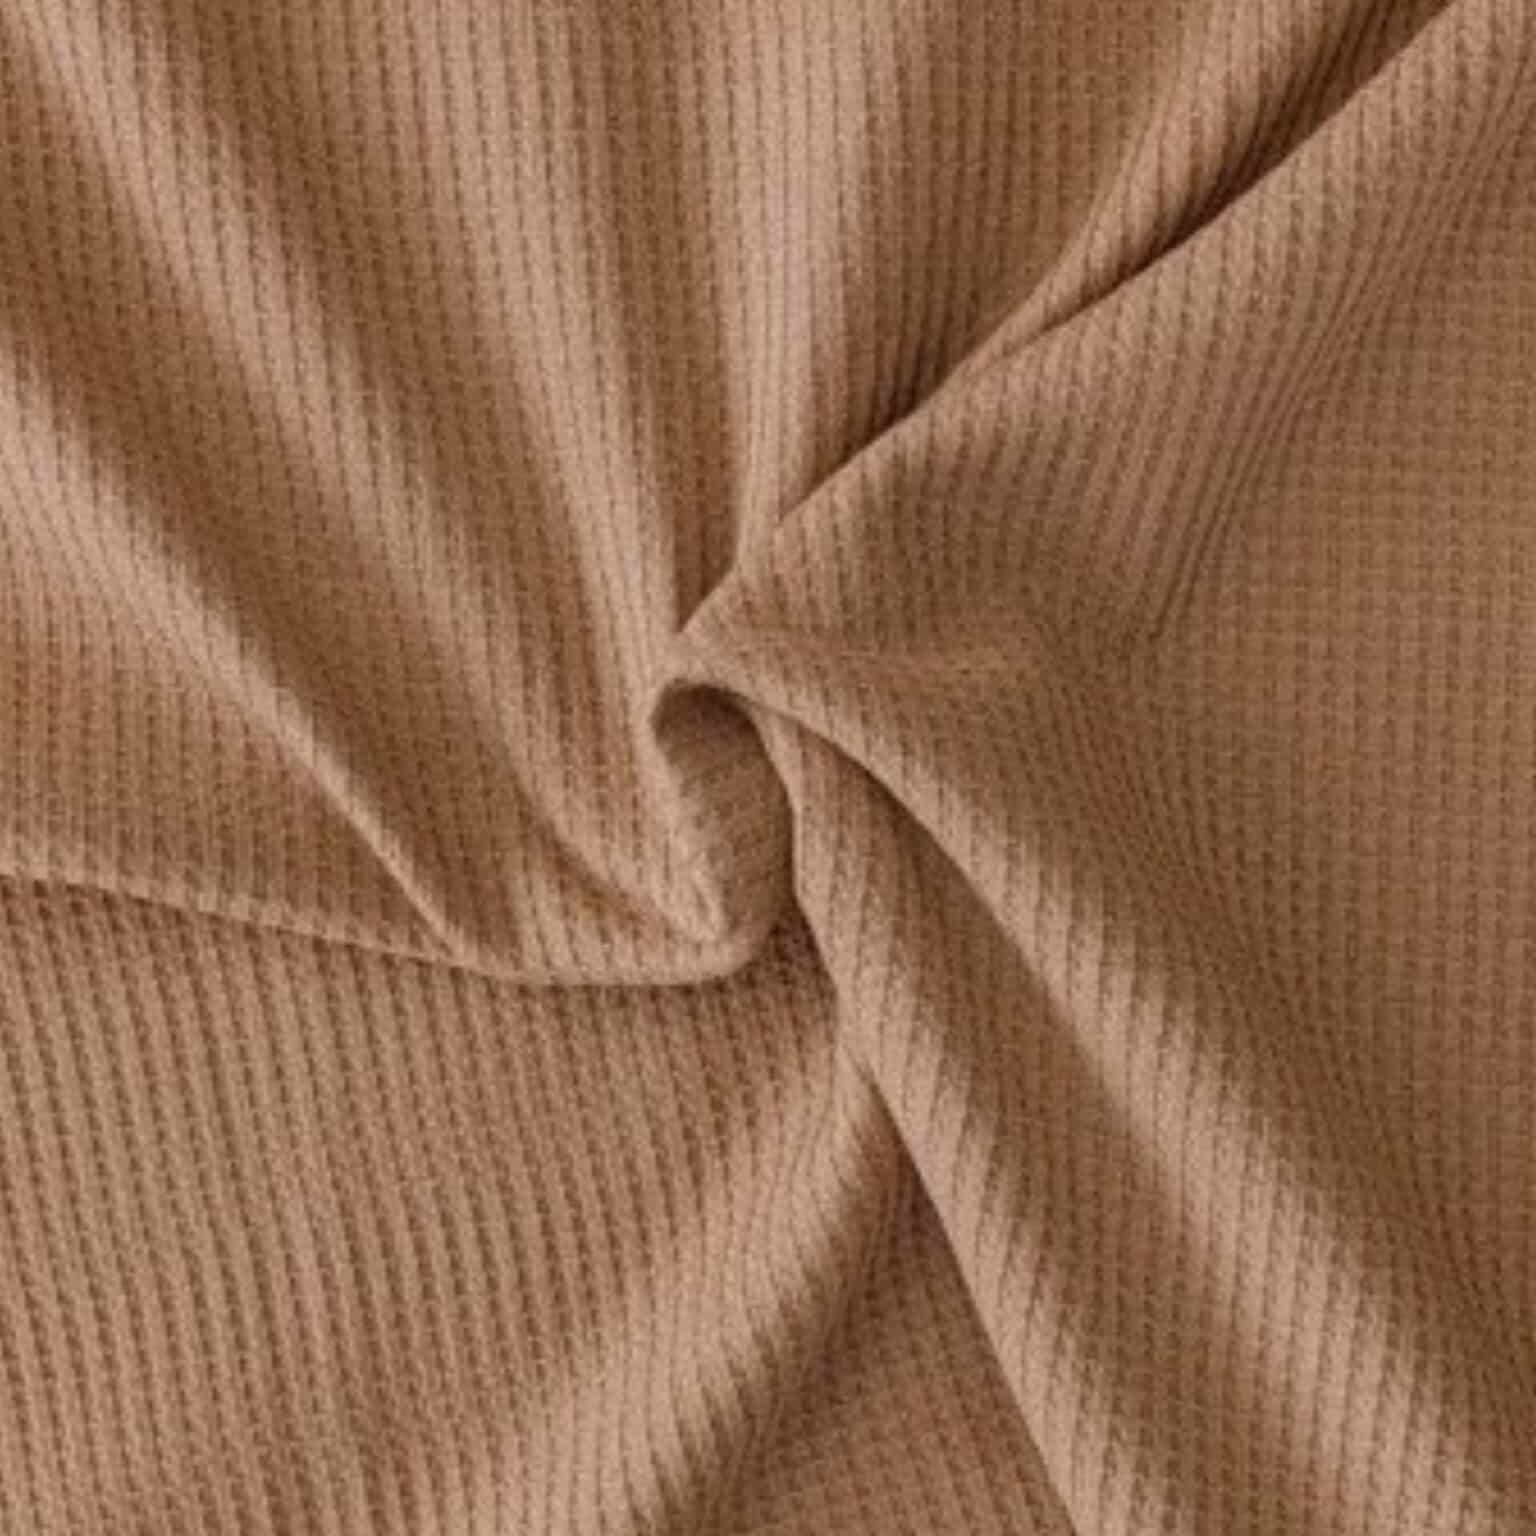 Cotton Jersey Fabric - Waffle Weave - Camel Brown - 140cm Wide